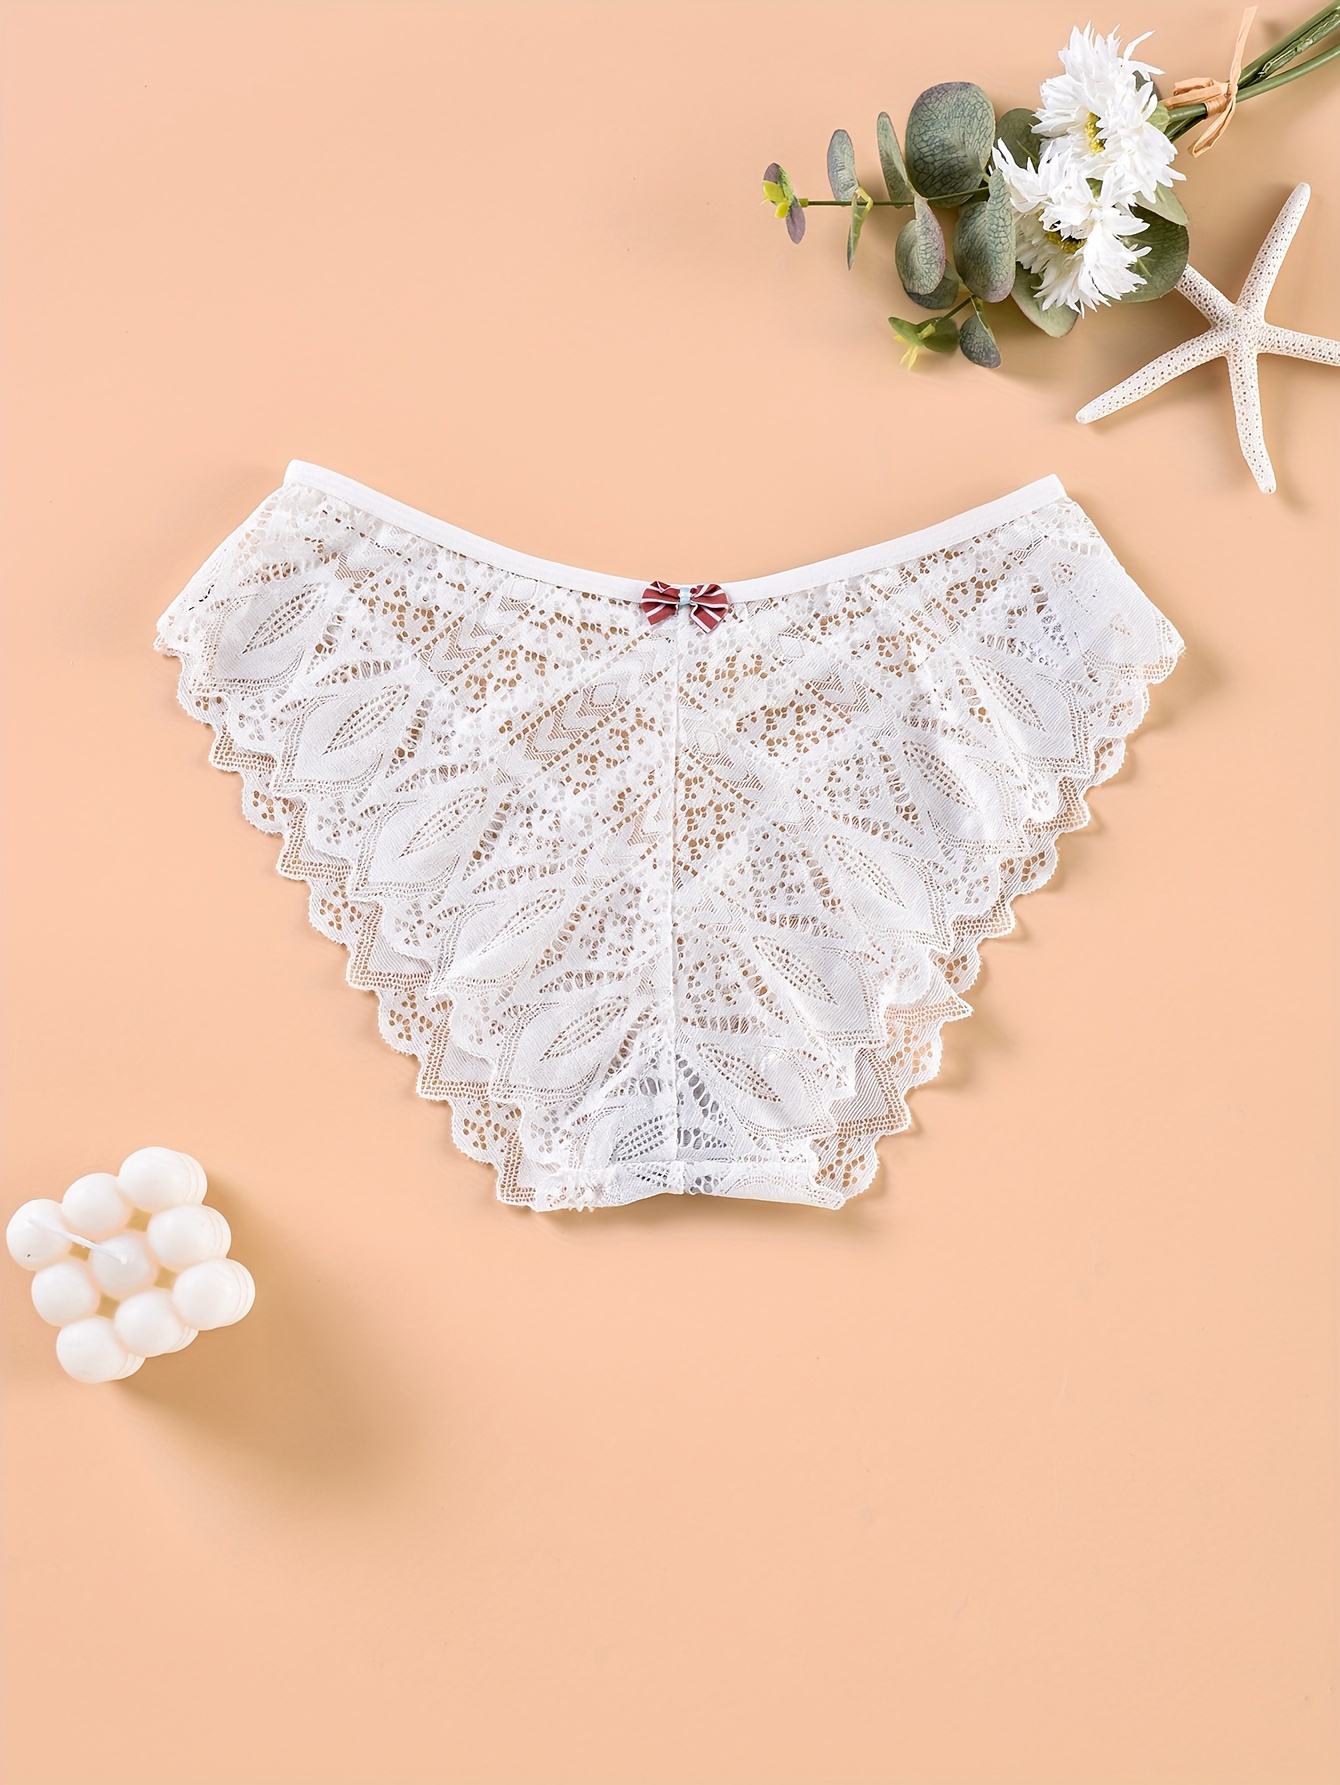 Sexy Lace Cheeky Panties, Strappy Low Cut Cheekies With Bow Tie, Women's  Lingerie & Underwear